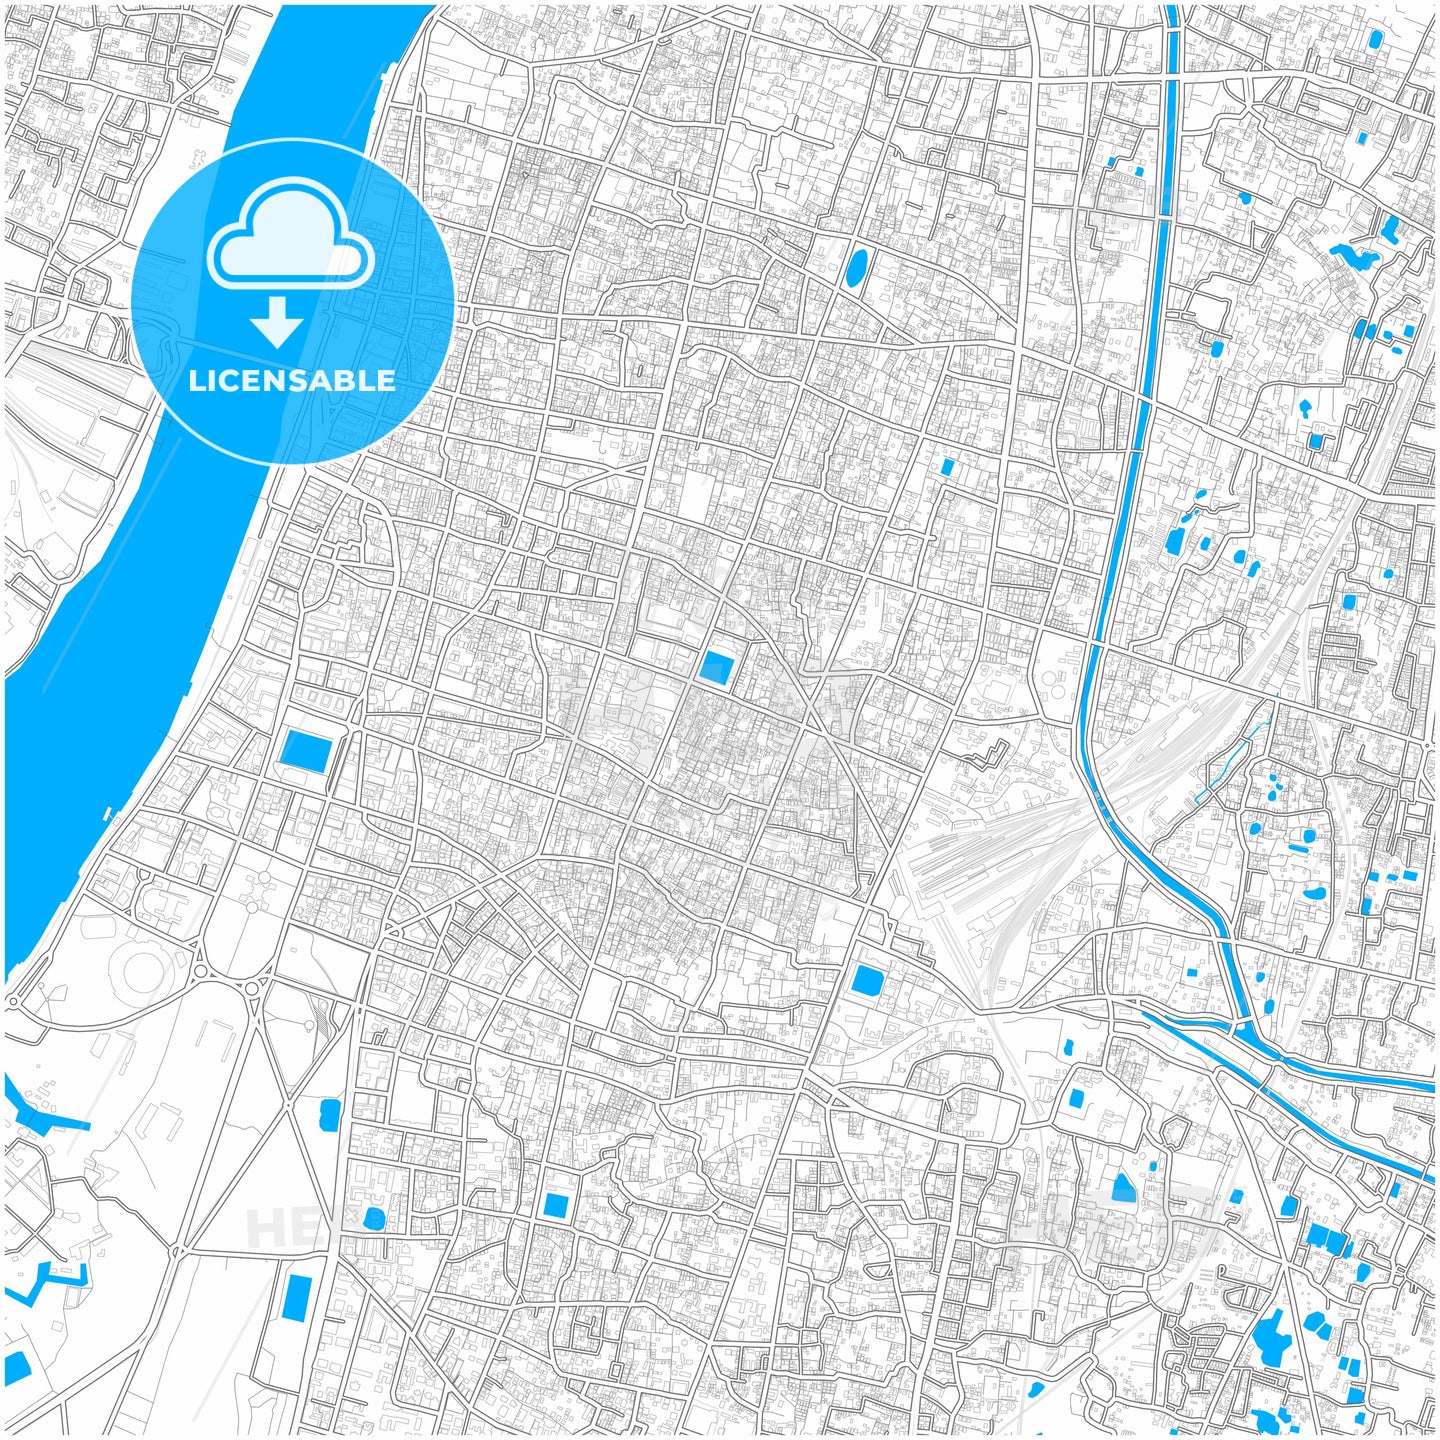 Kolkata, West Bengal, India, city map with high quality roads.